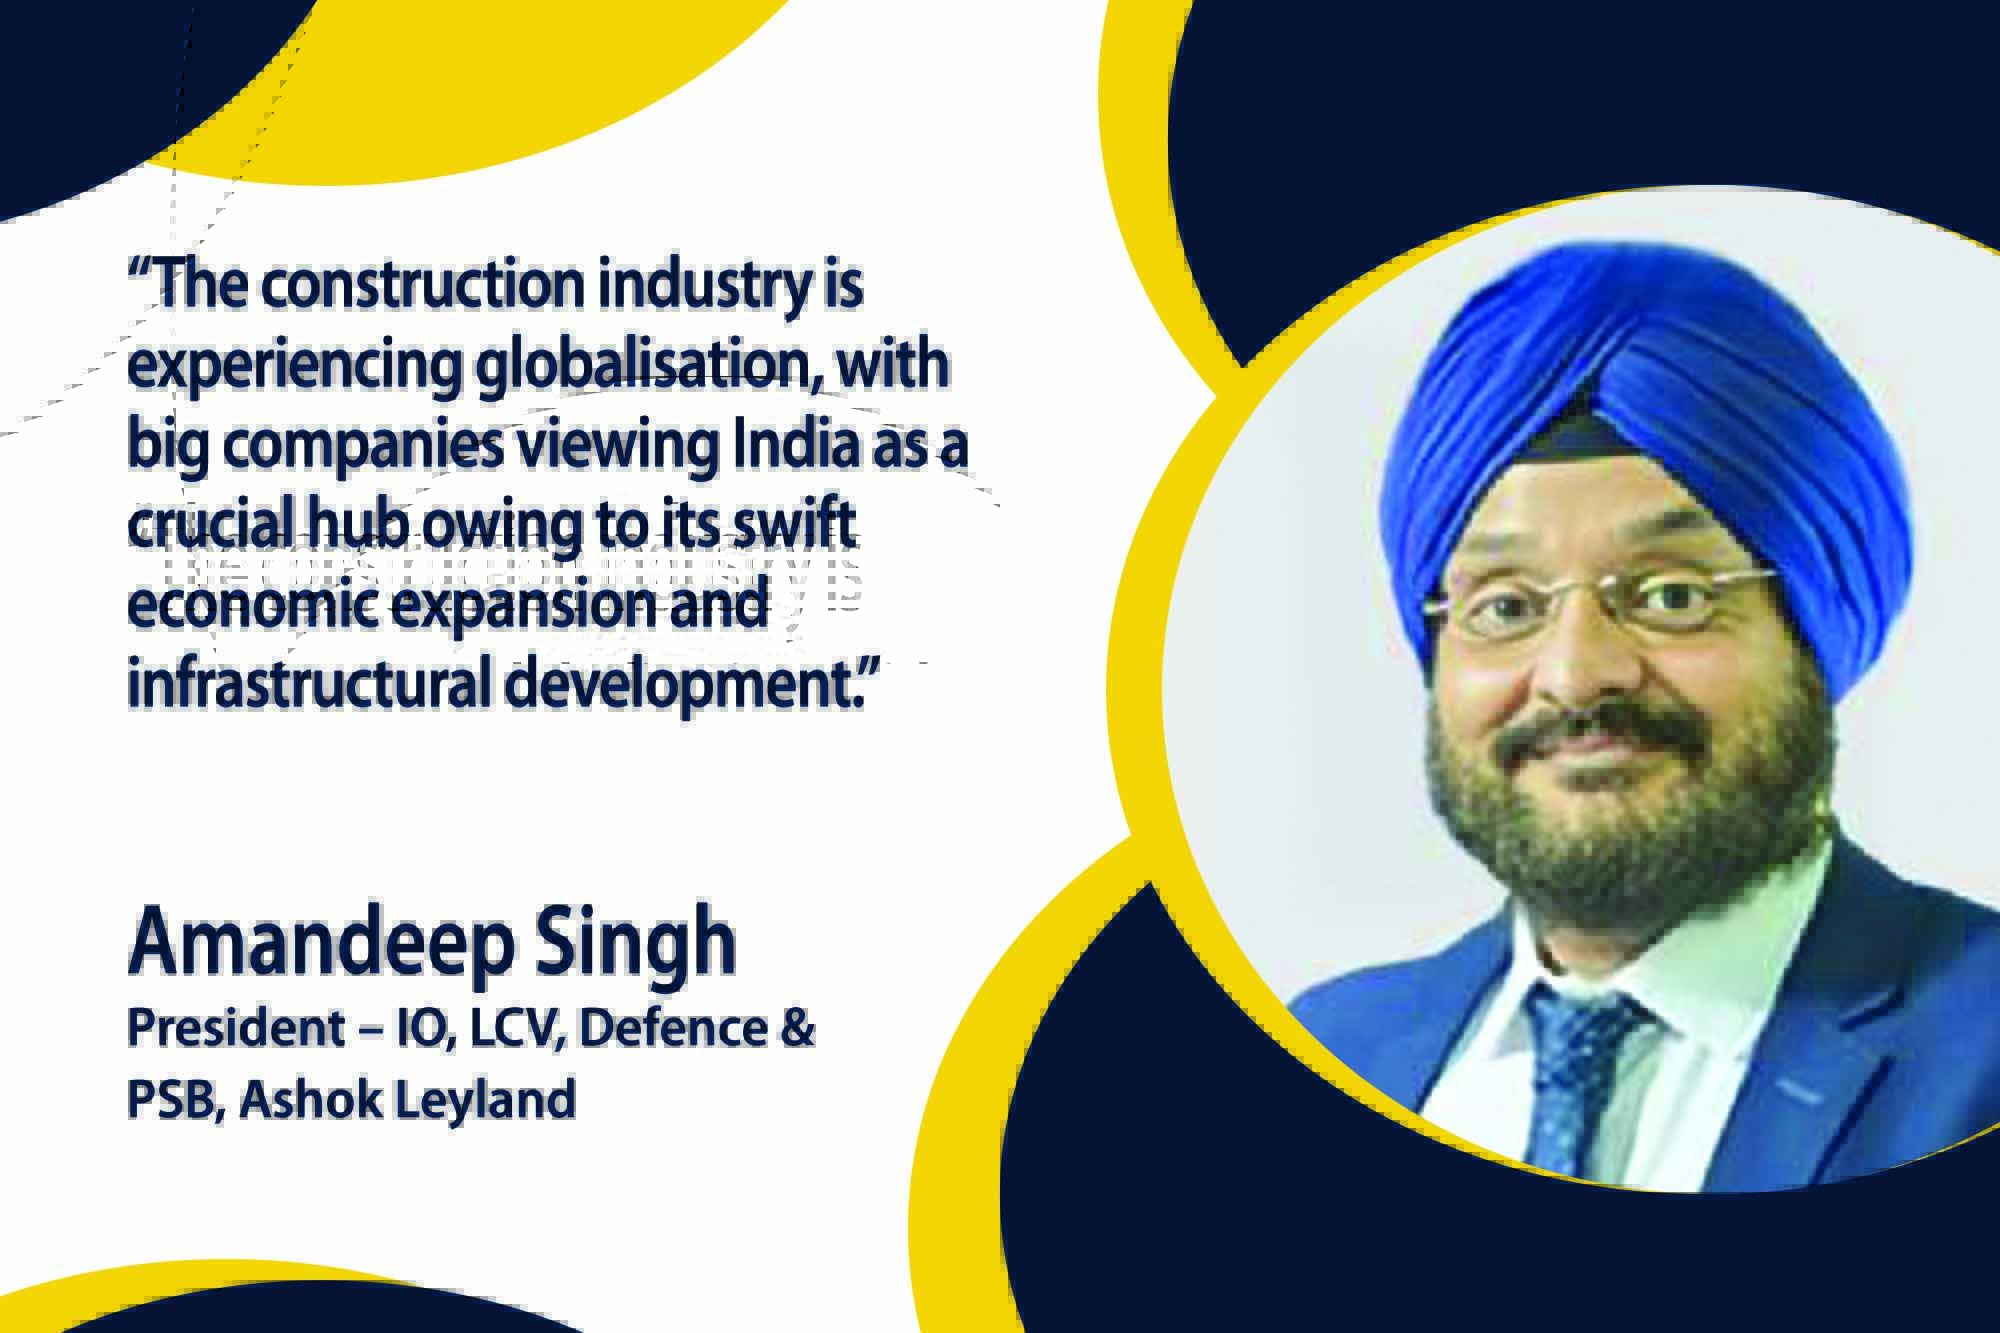 As the construction industry experiences globalisation, Ashok Leyland emerges as a crucial player in aligning with this trend.